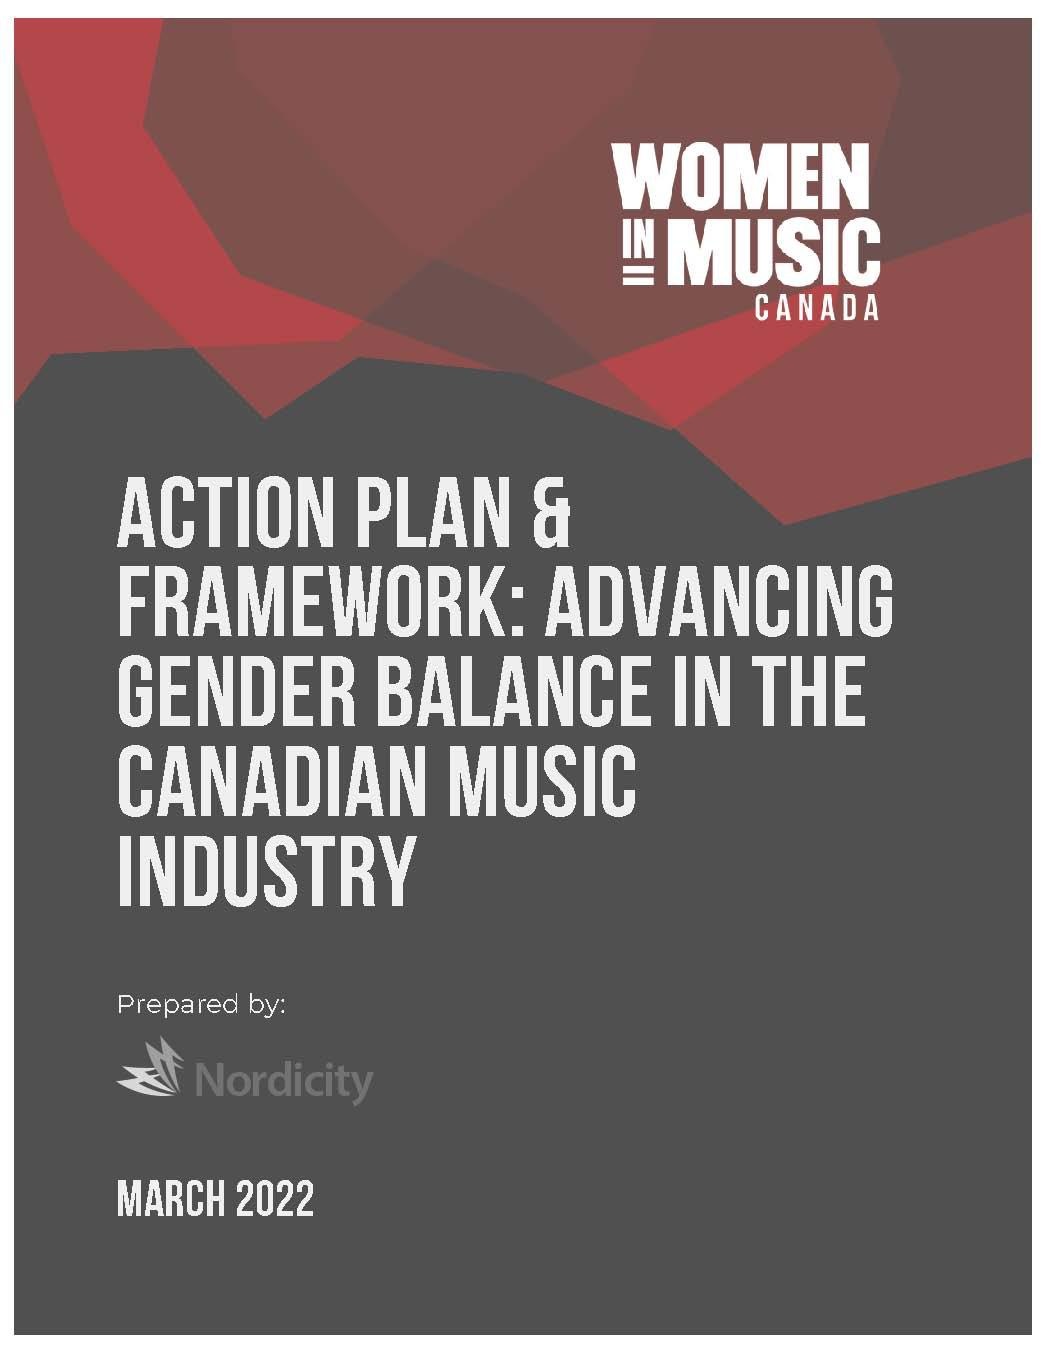 An Action Plan Framework for Women, Non-binary, Gender Fluid and Gender Diverse Individuals in Ontario’s Music Sector